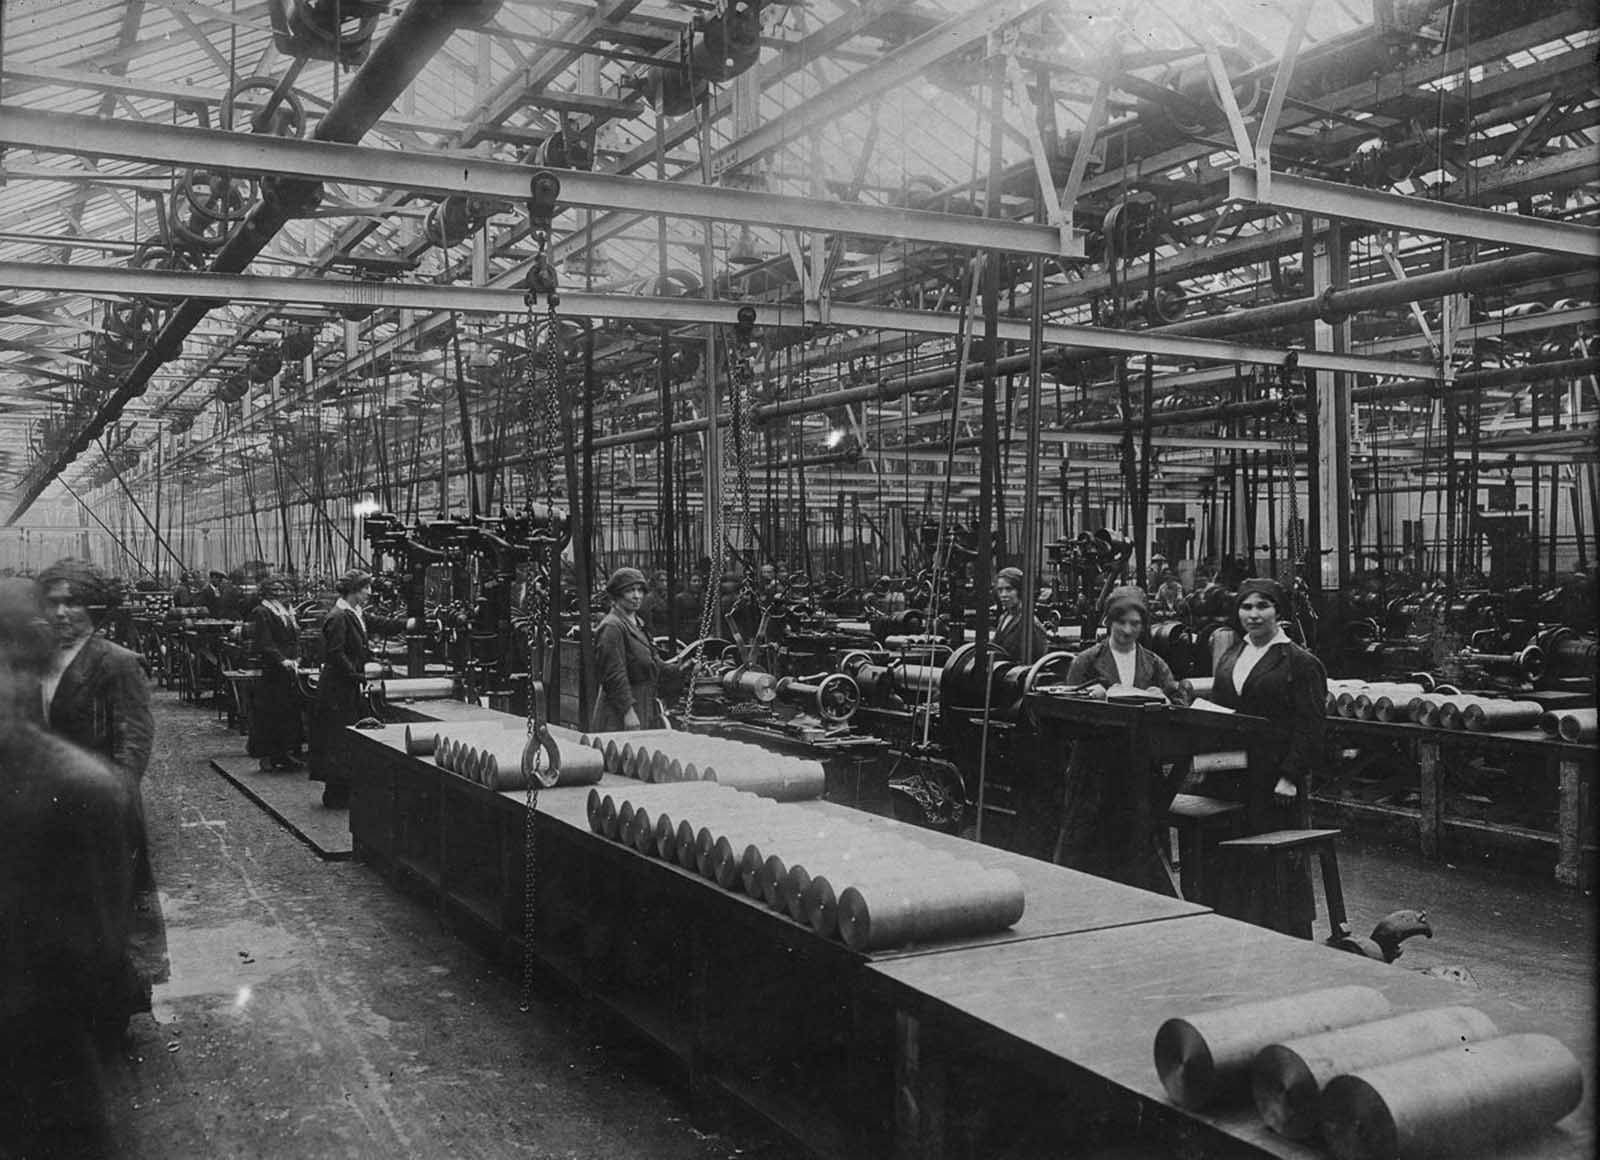 Gear planers in a factory in Sunderland.